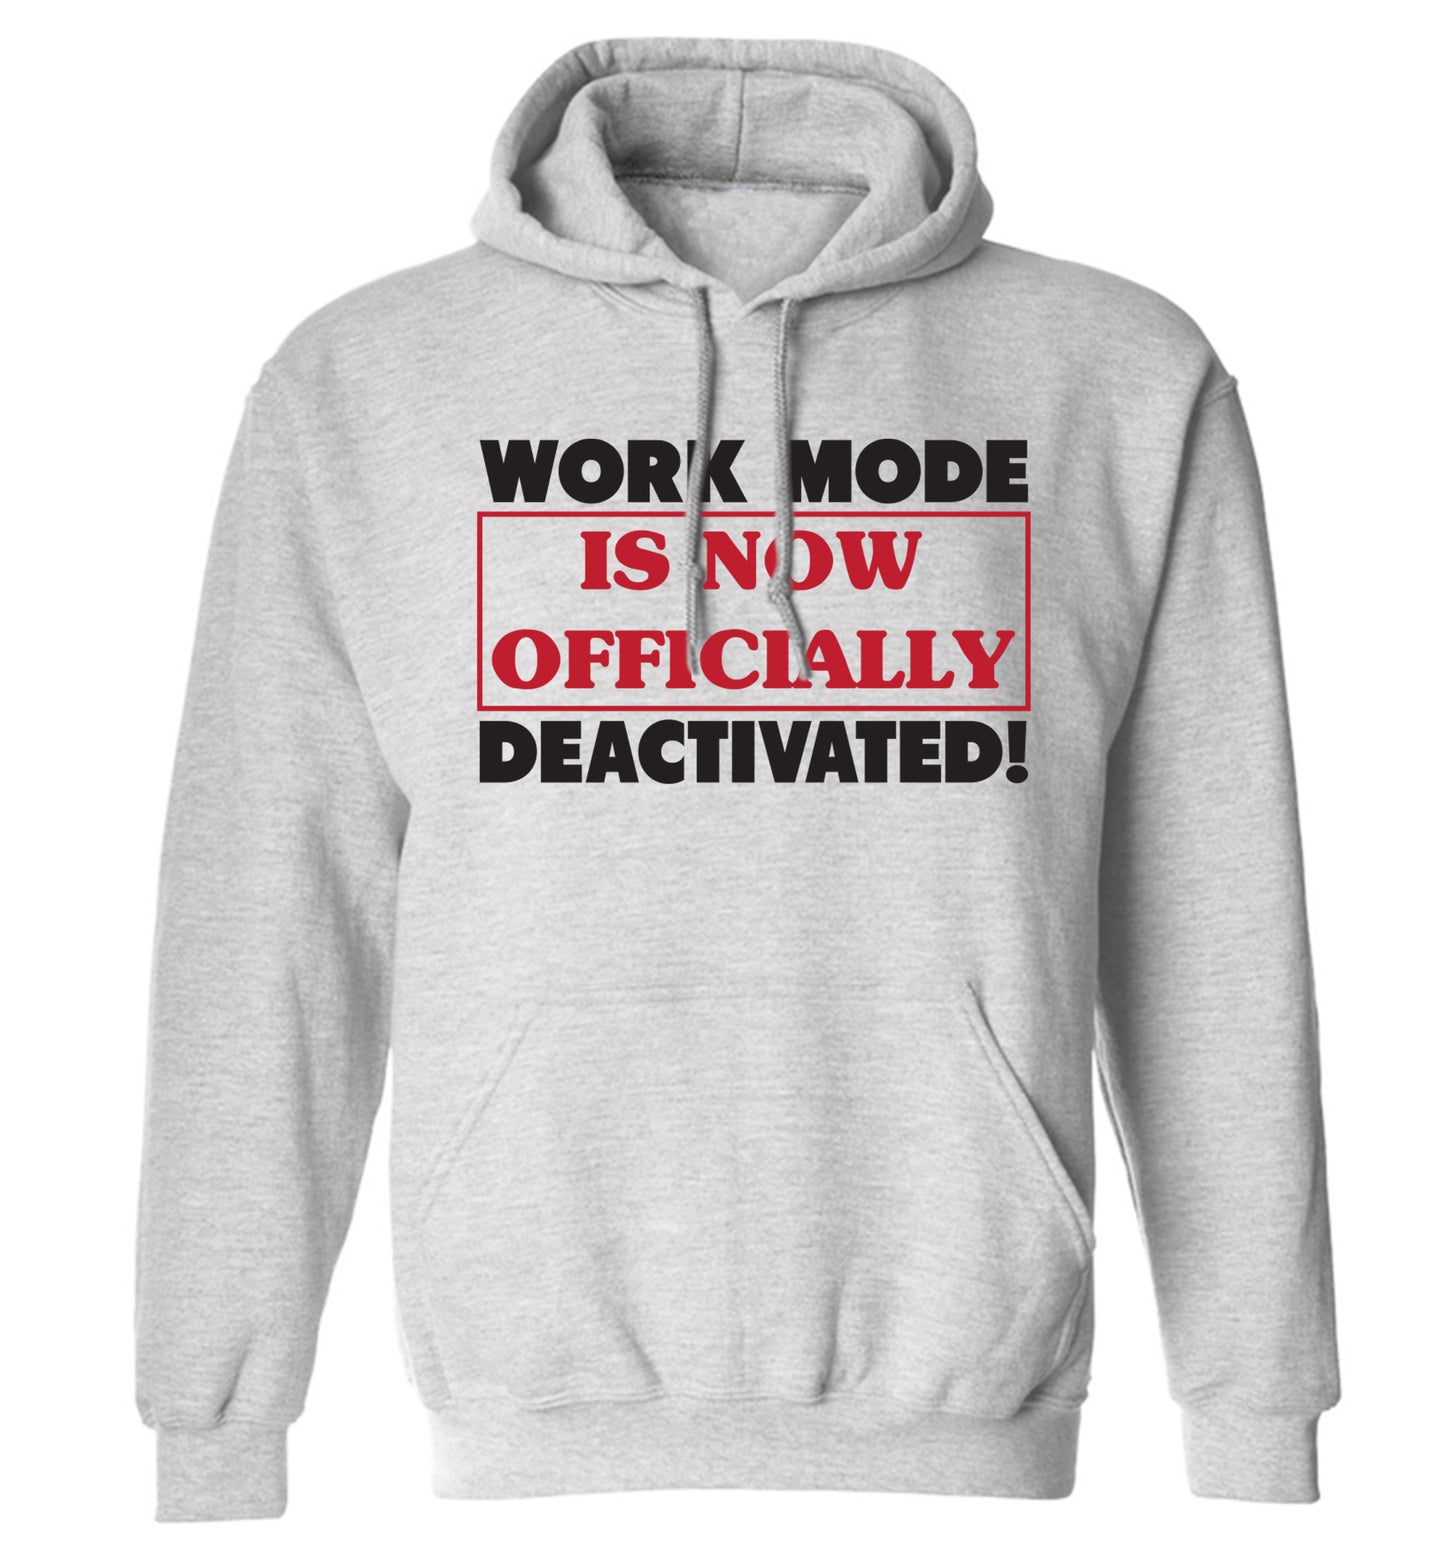 Work mode is now officially deactivated adults unisex grey hoodie 2XL